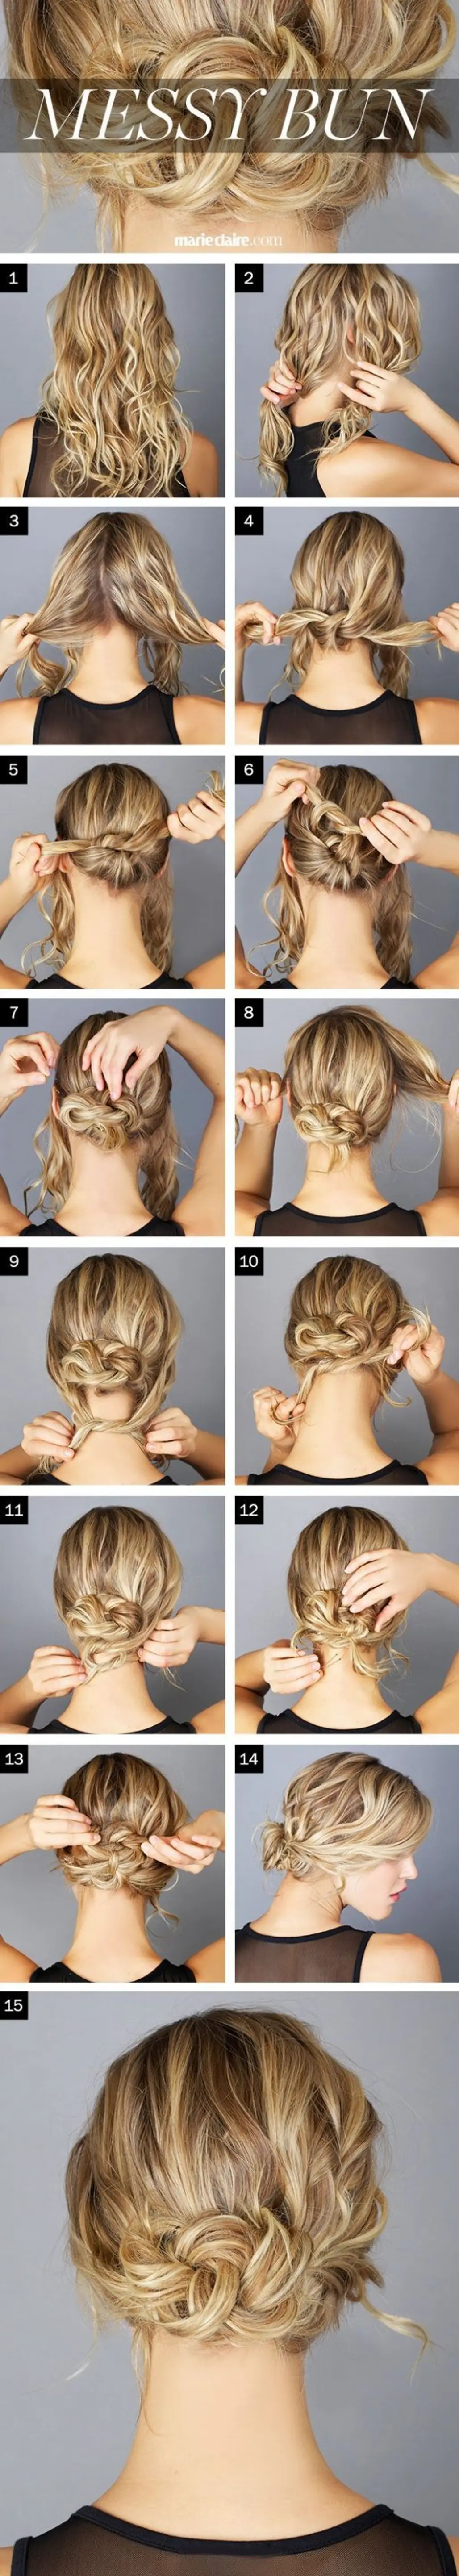 The Marie Claire Messy Bun